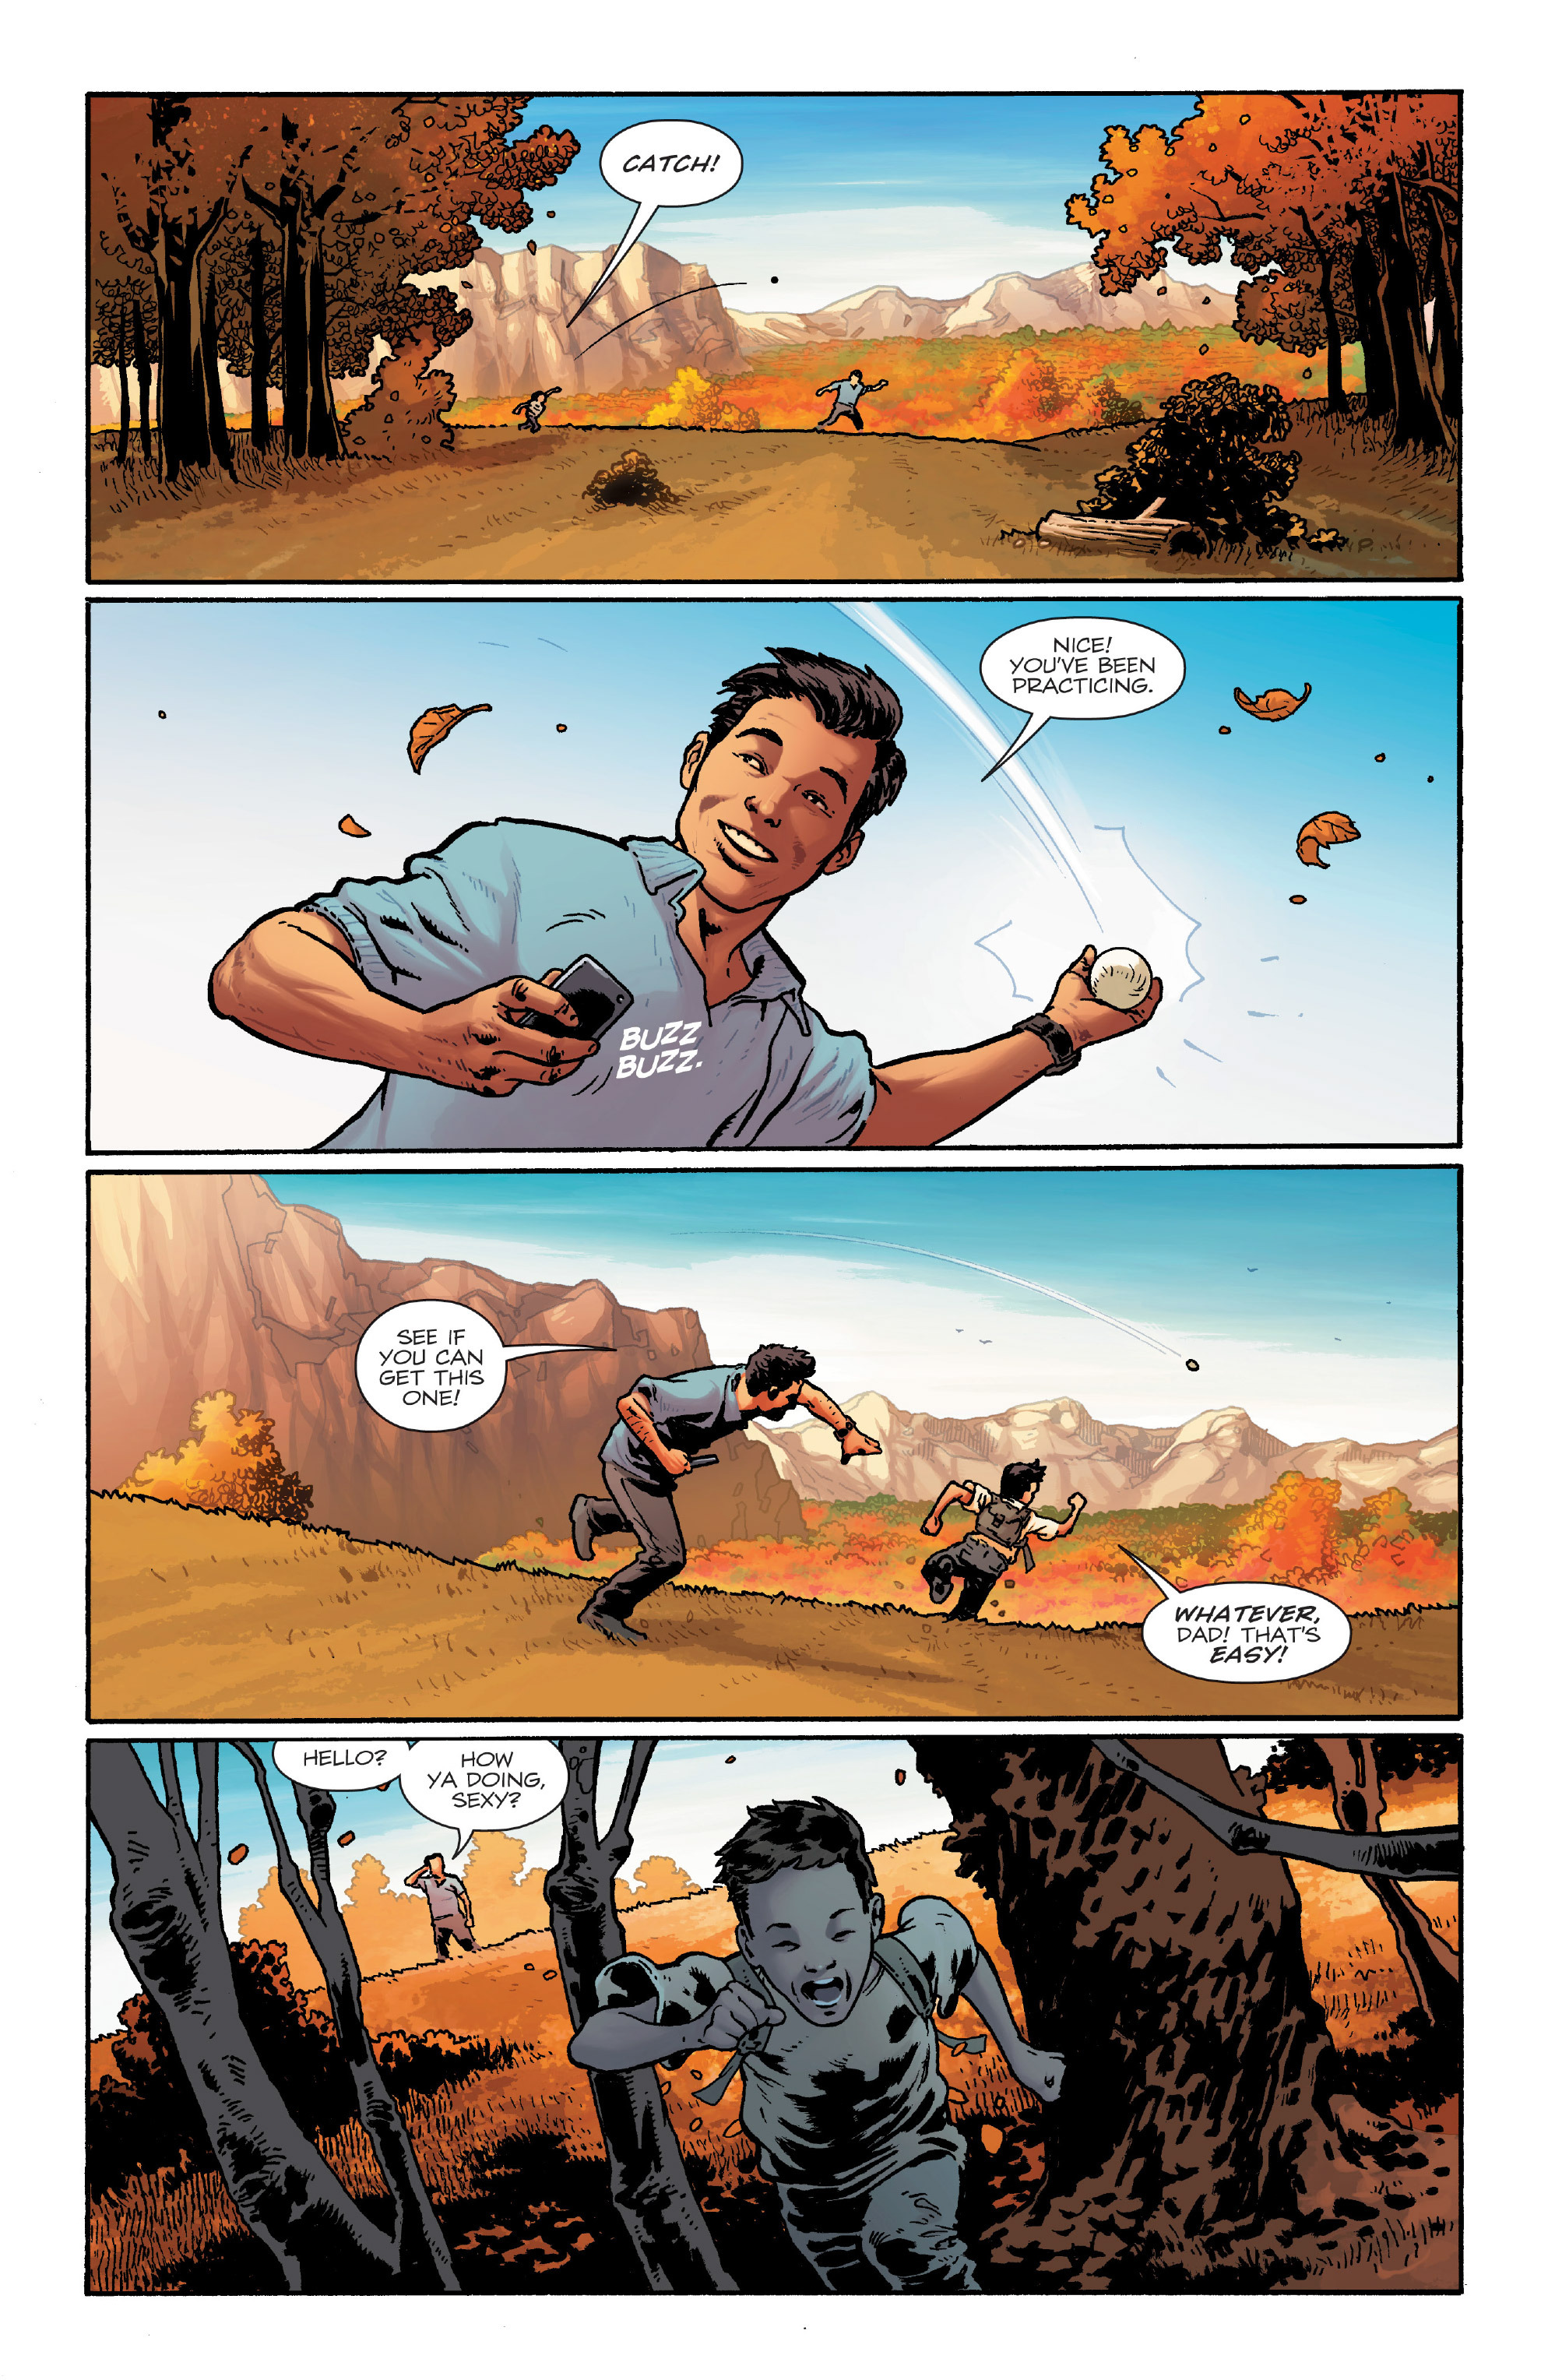 Birthright (2014-): Chapter 1 - Page 3